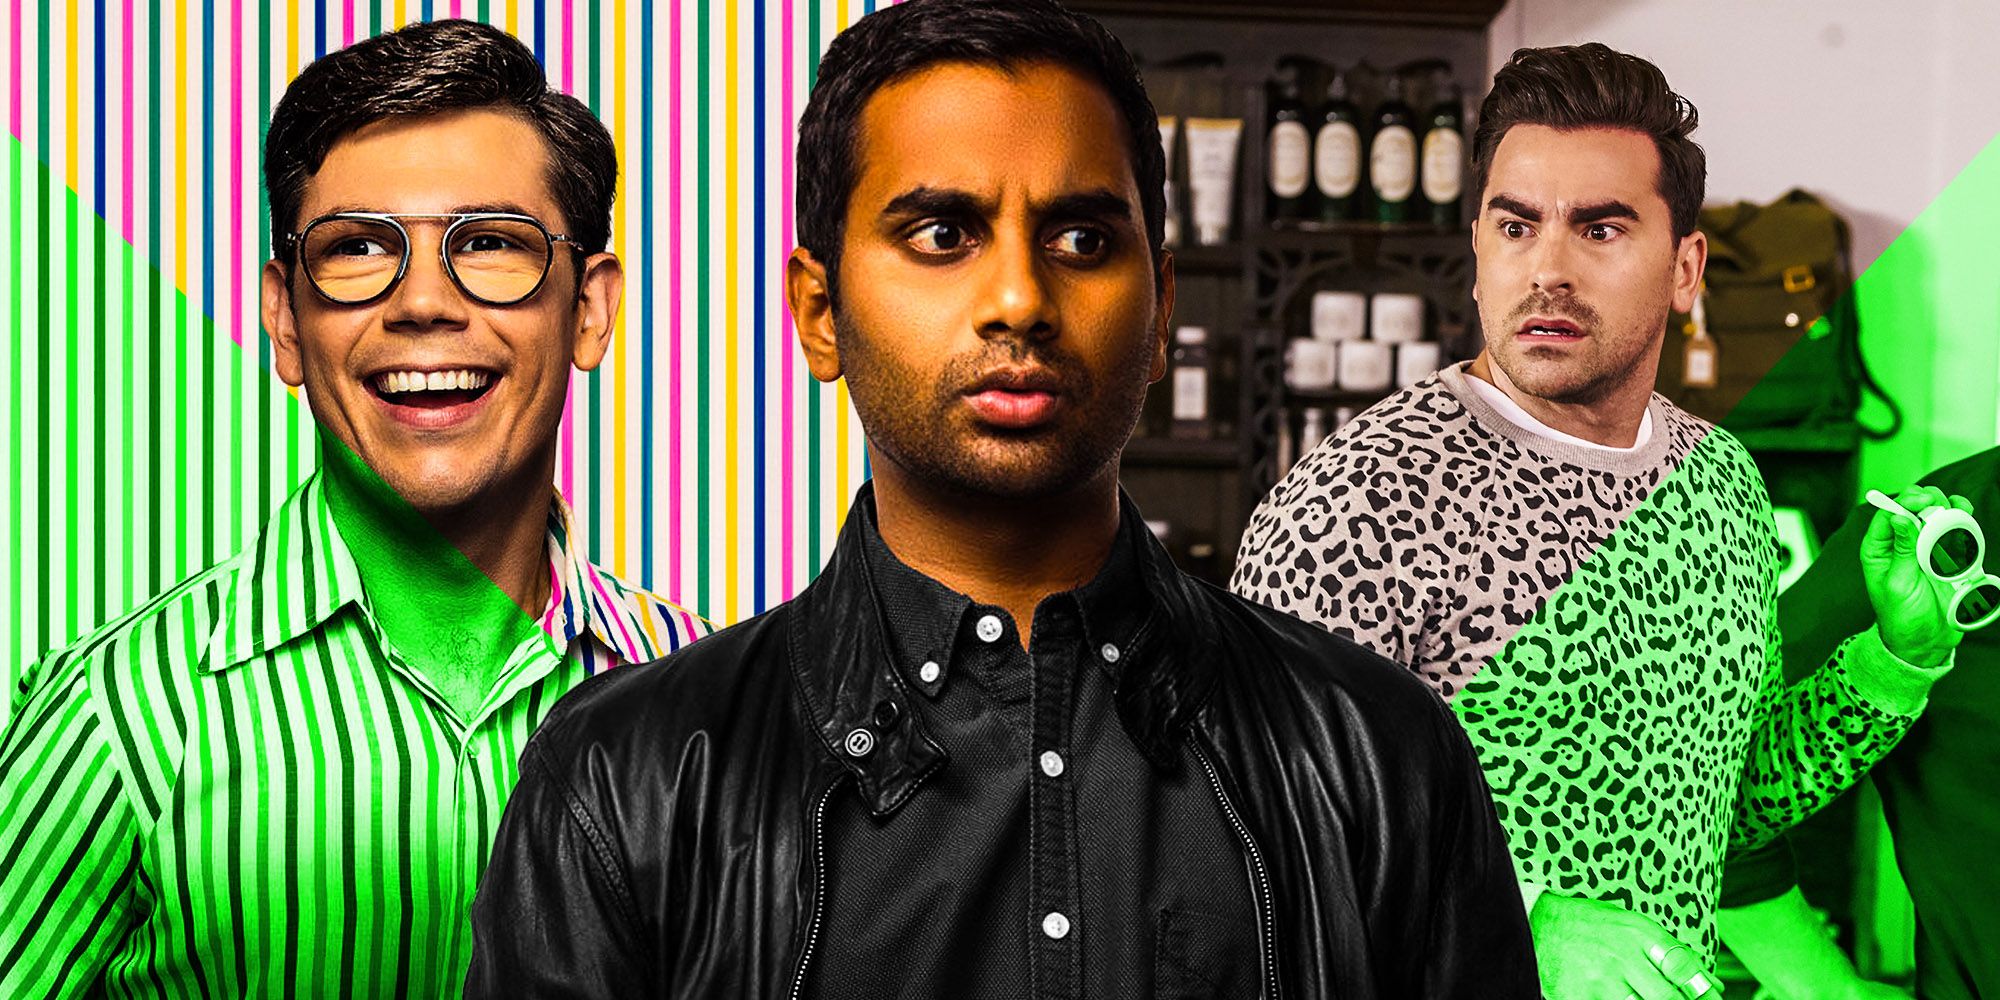 LGBTQ shows on netflix Schitts creek Master of none special